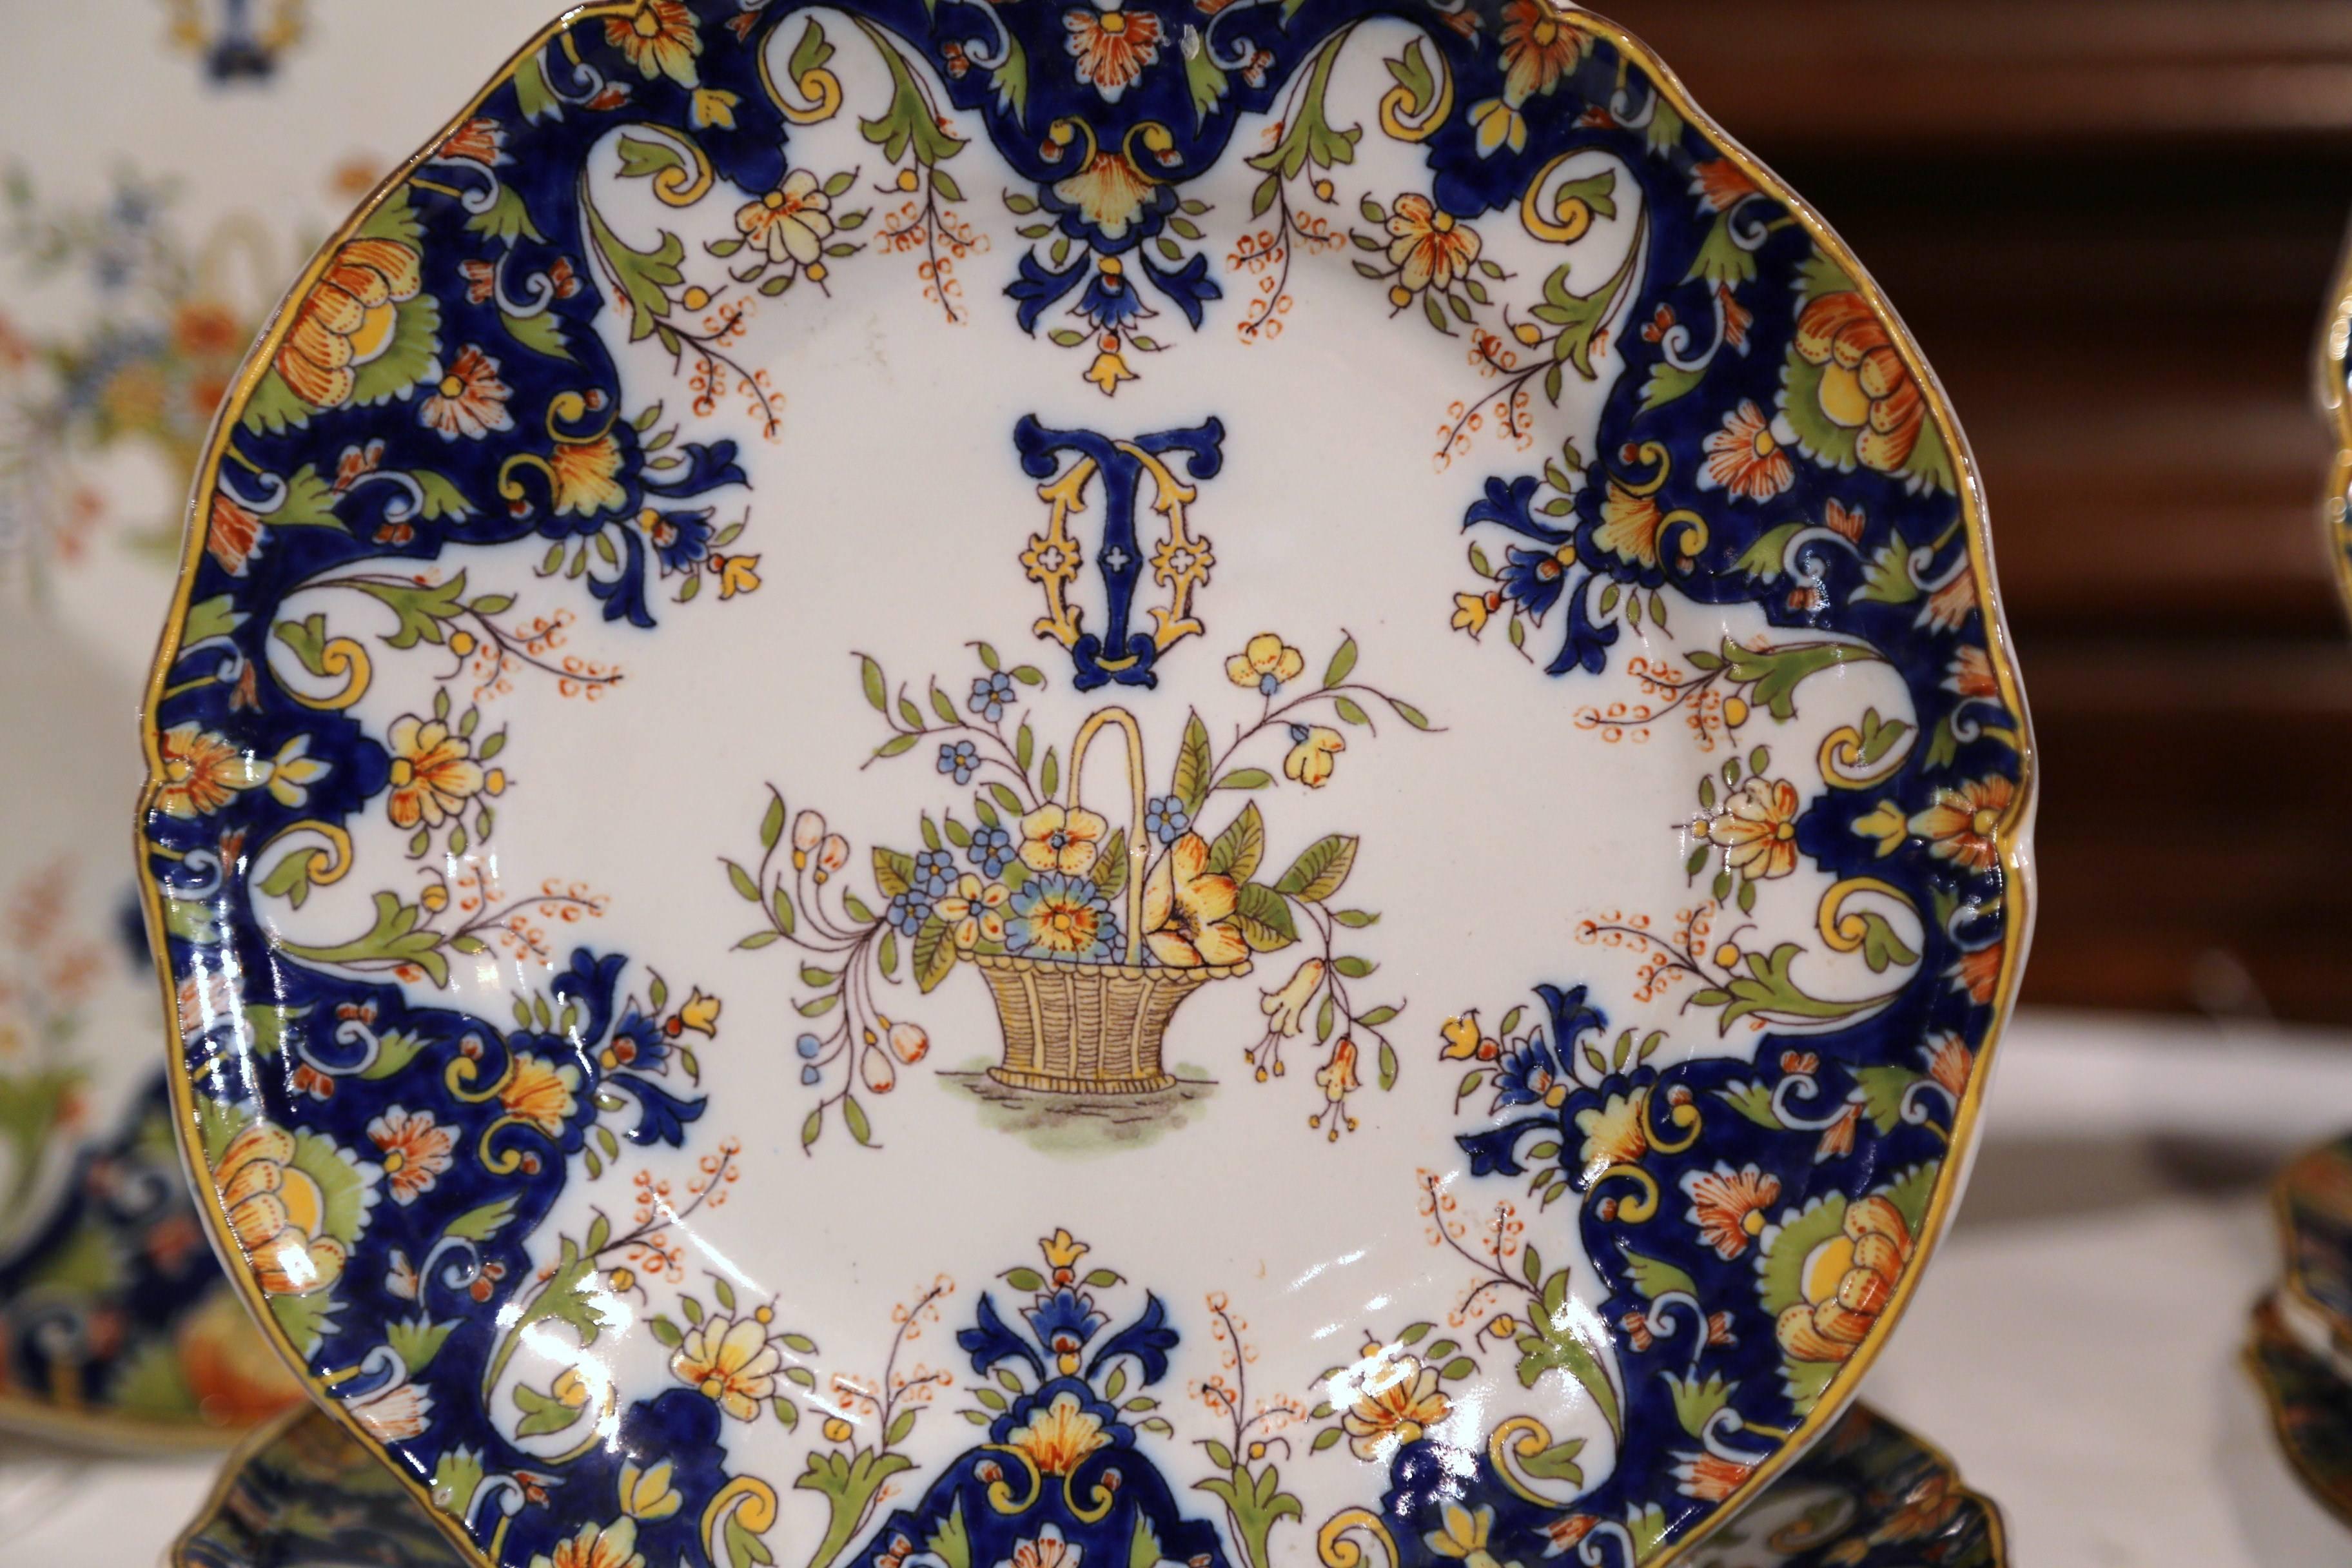 19th Century Set of Ten French Painted Faience Plates and Dishes from Normandy In Good Condition For Sale In Dallas, TX